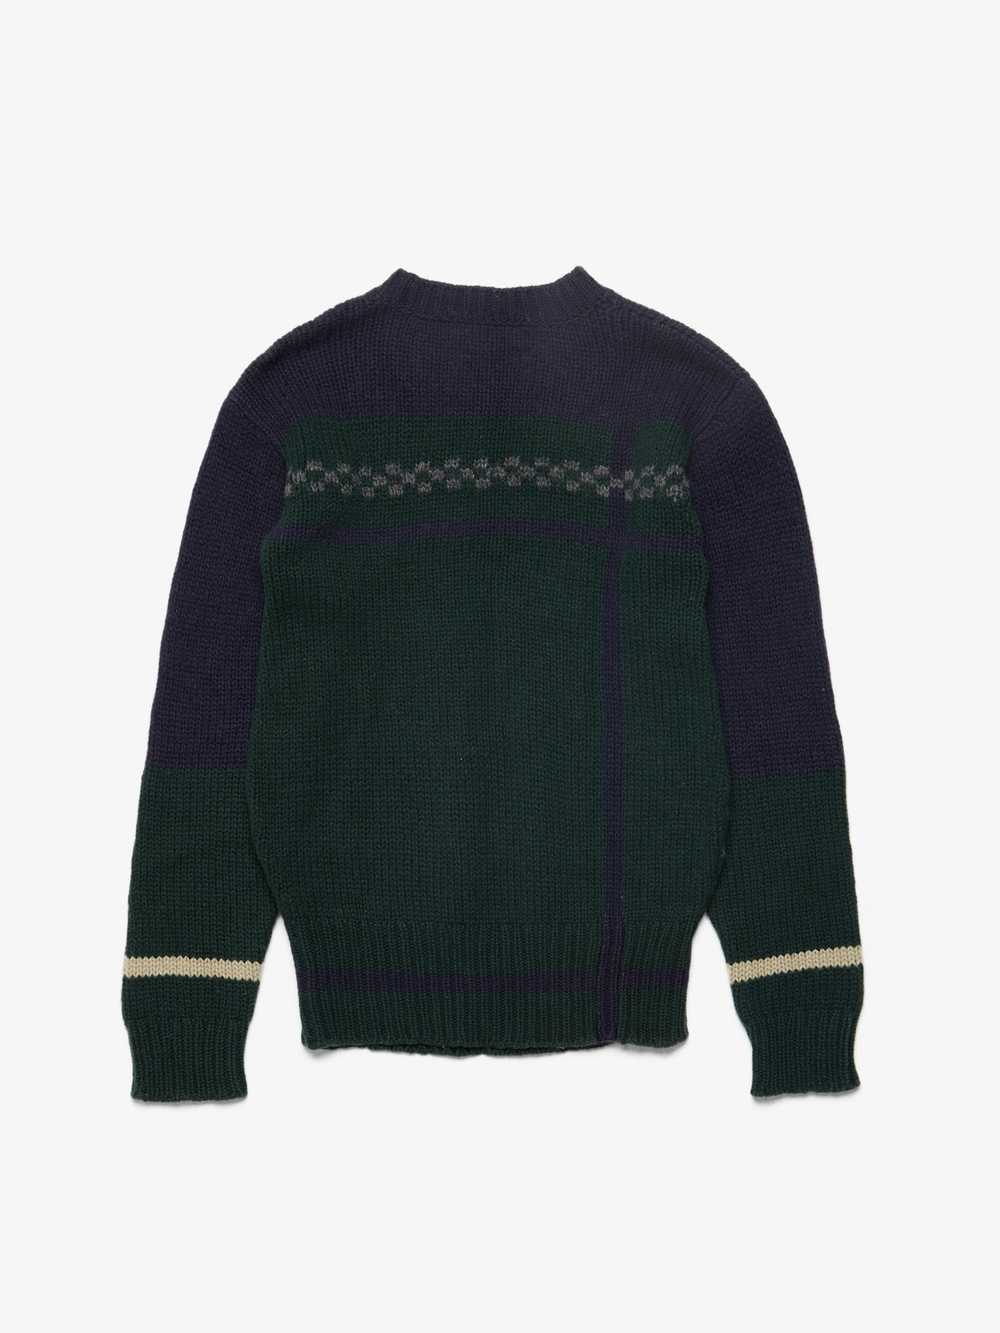 Undercover AW96 Navy And Green Barbed Wire Knitte… - image 2